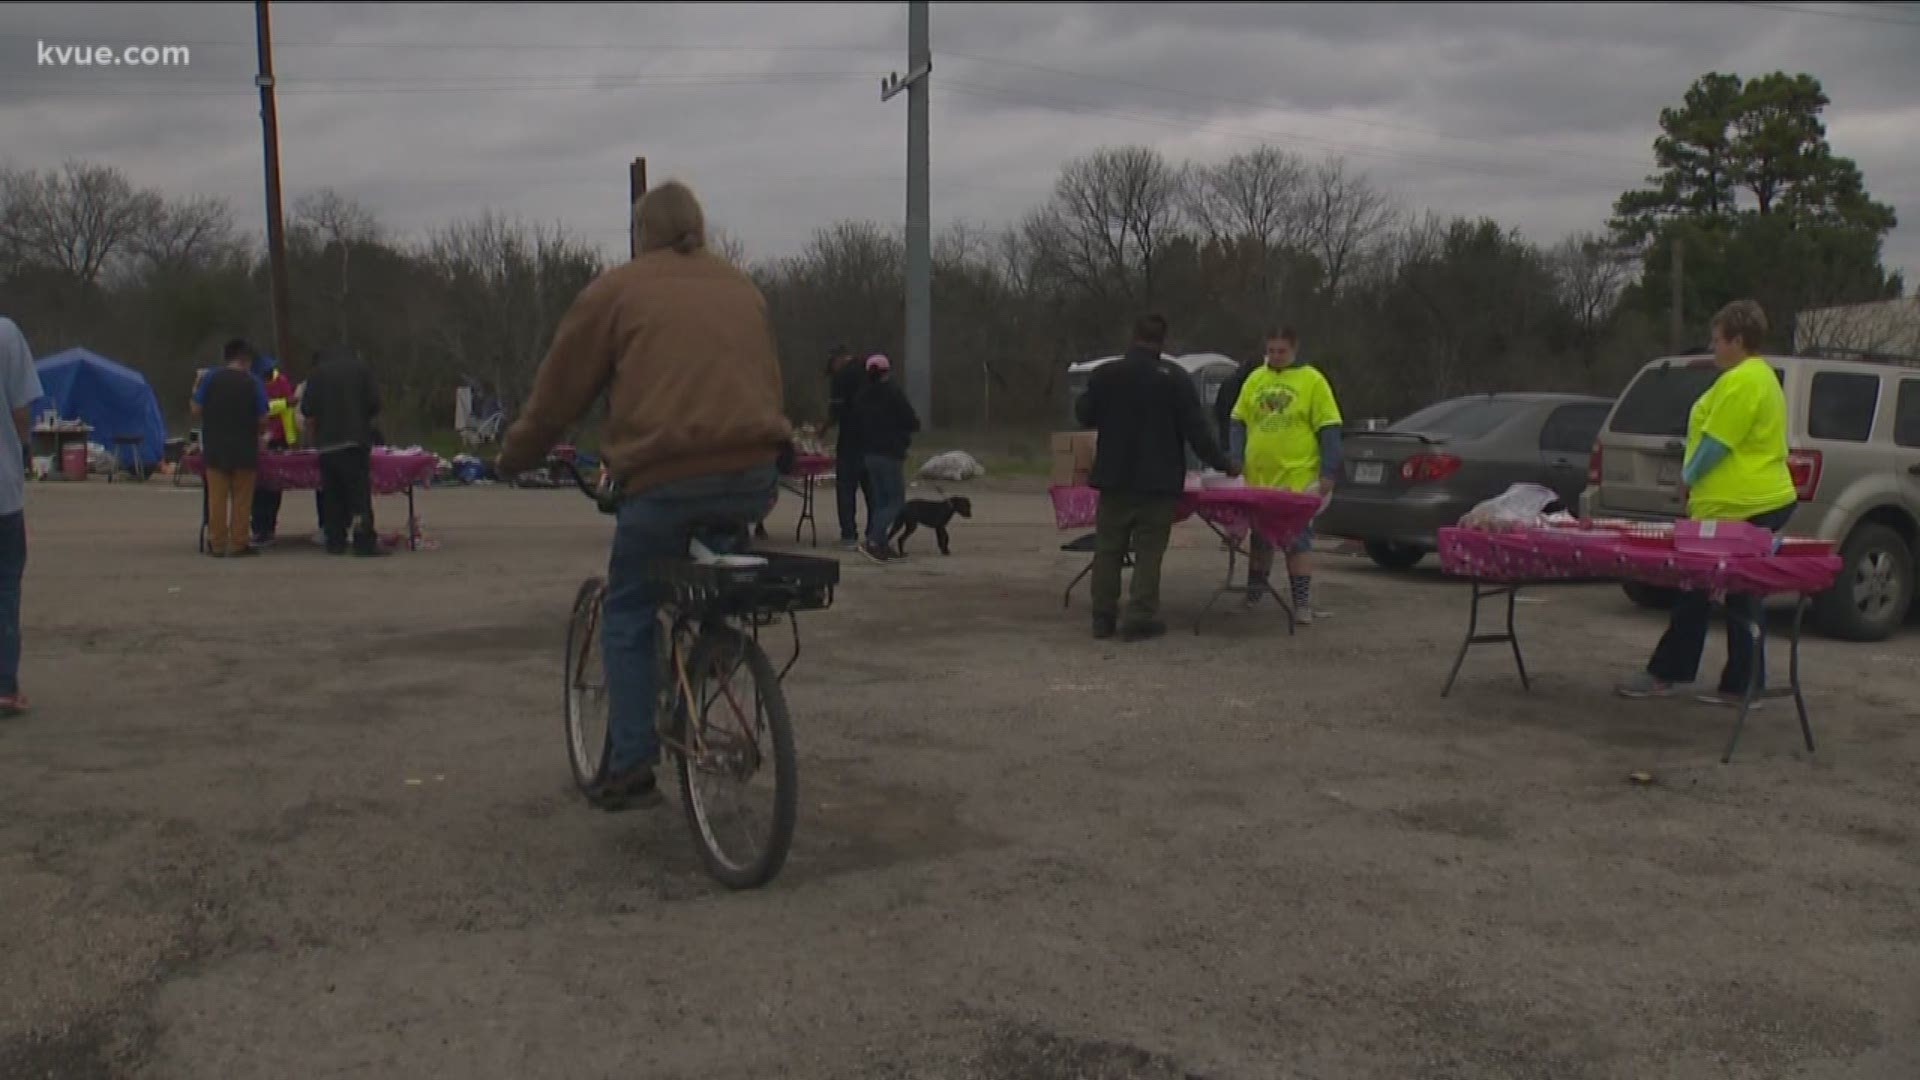 Organizations came together at the state-designated state homeless camp in South Austin on Saturday.